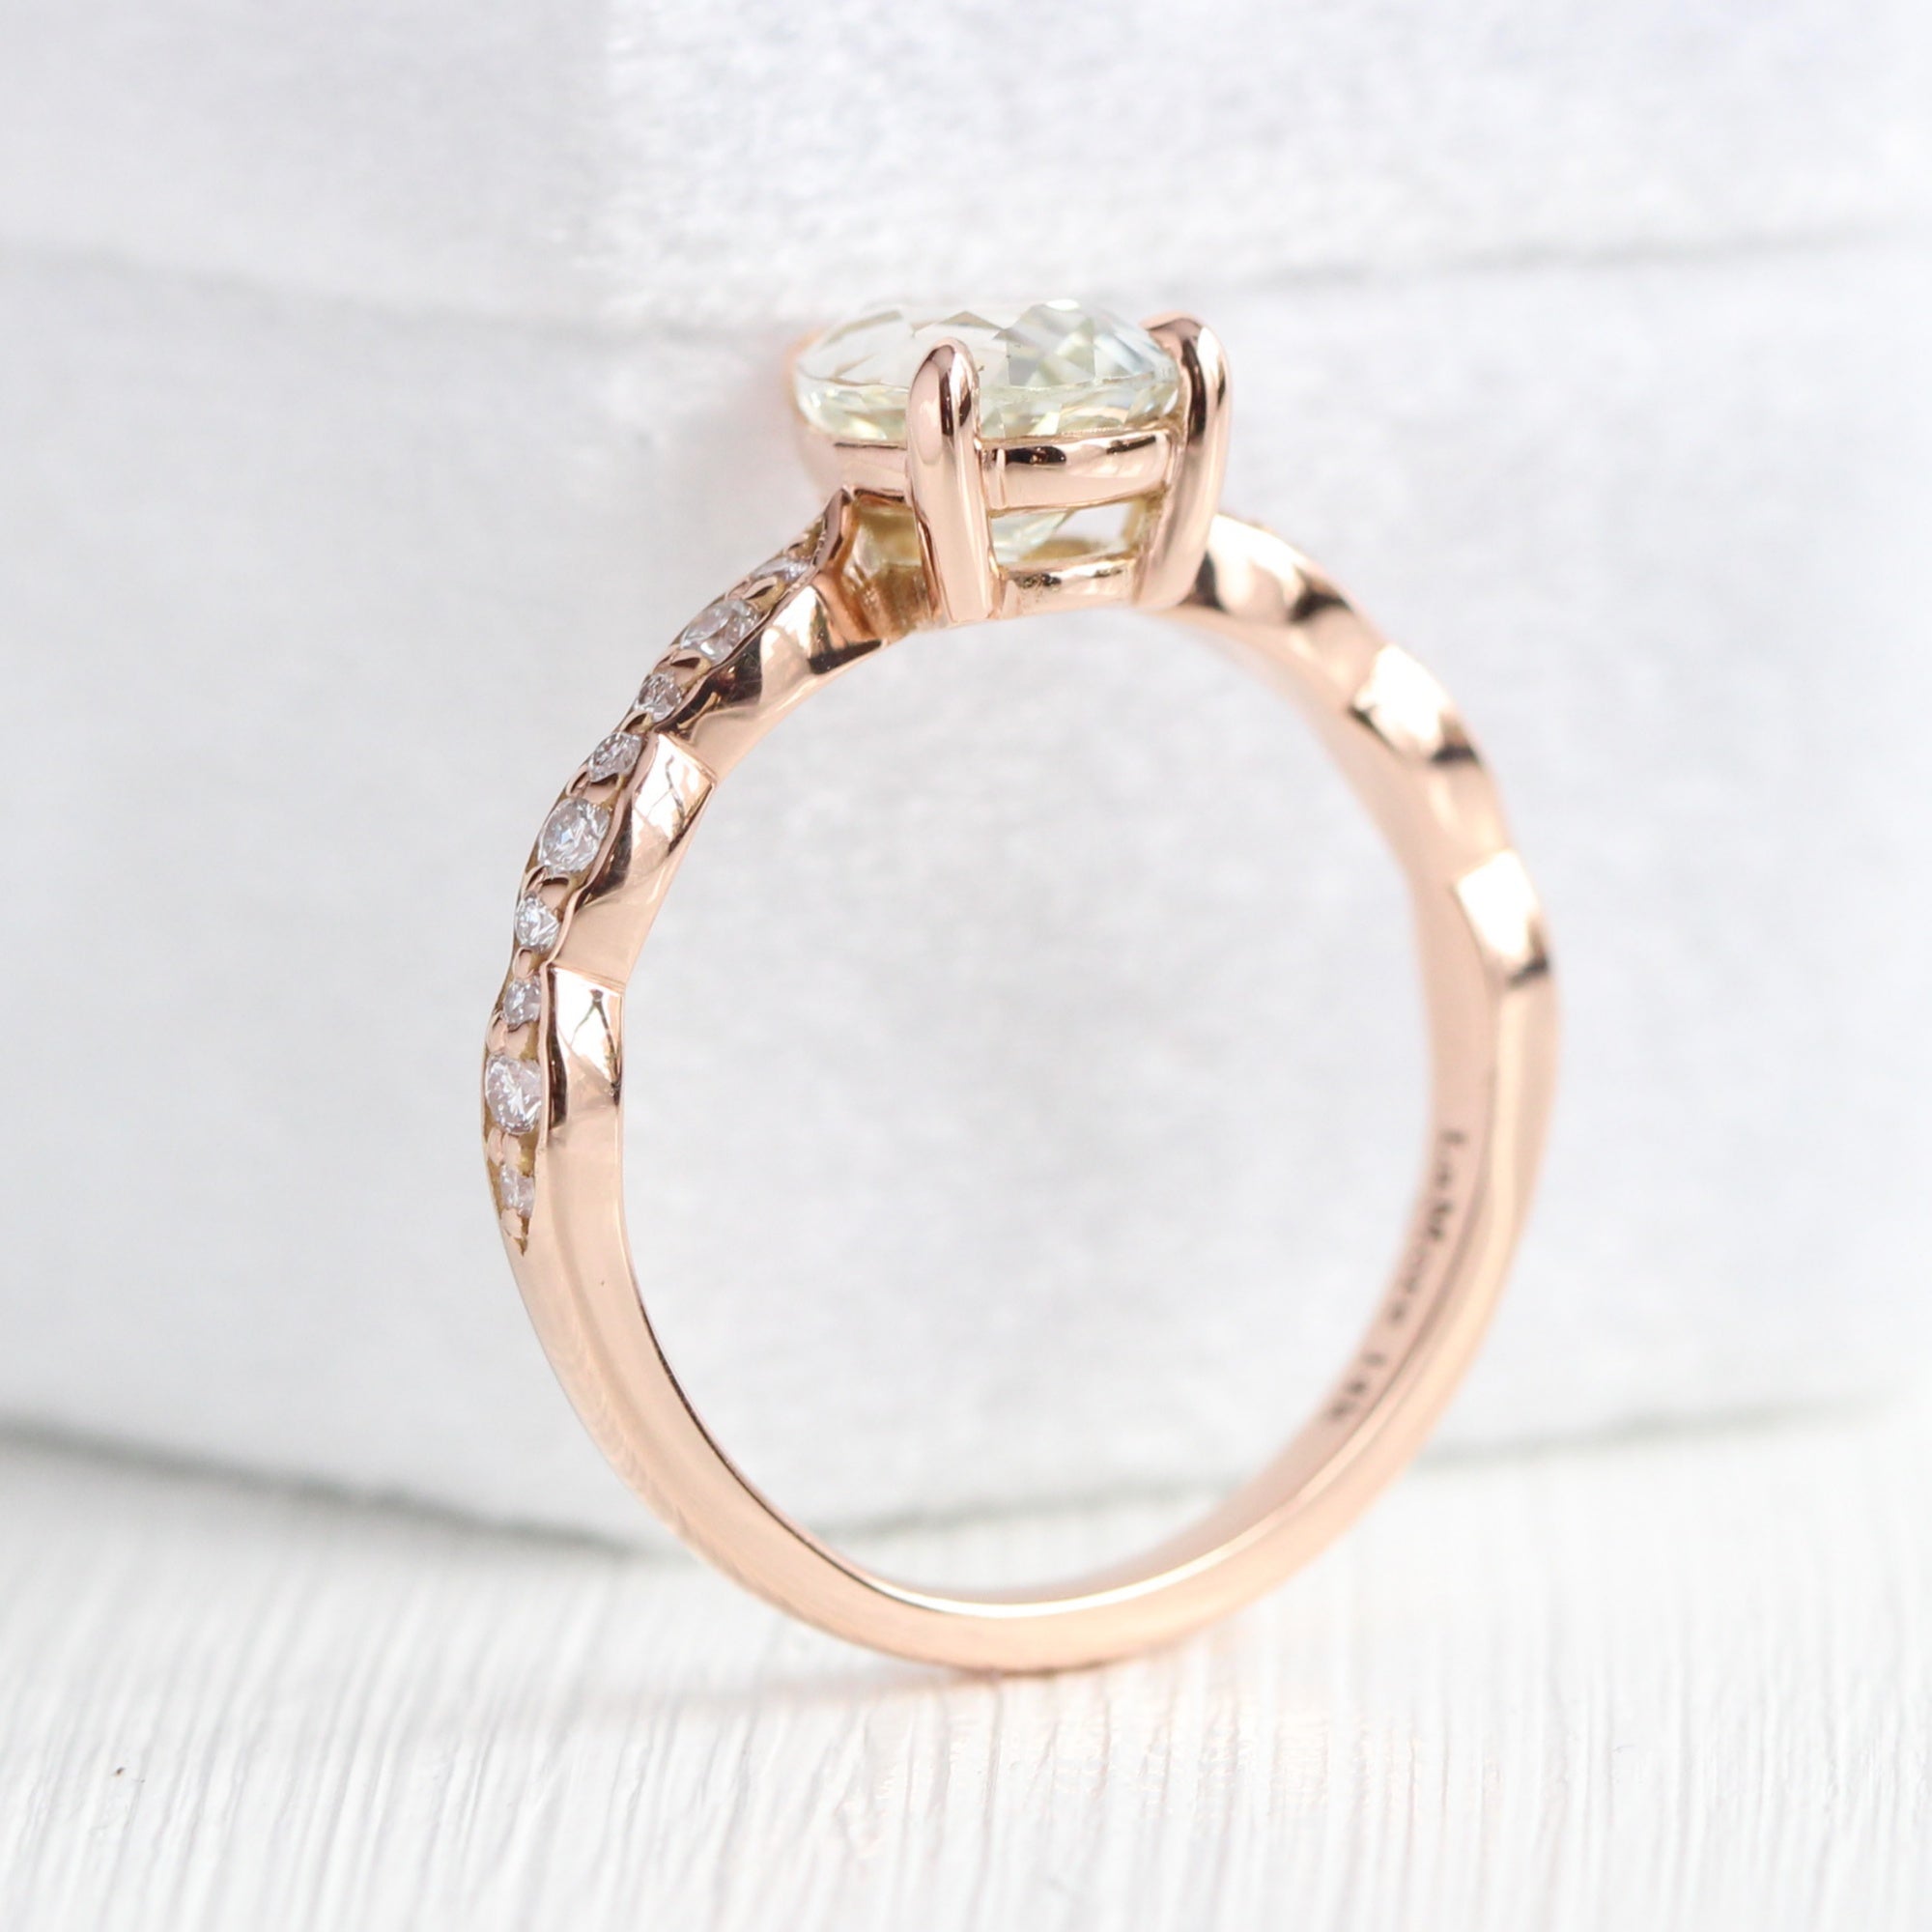 Pear seafoam green sapphire ring rose gold diamond band low set engagement ring la more design jewelry